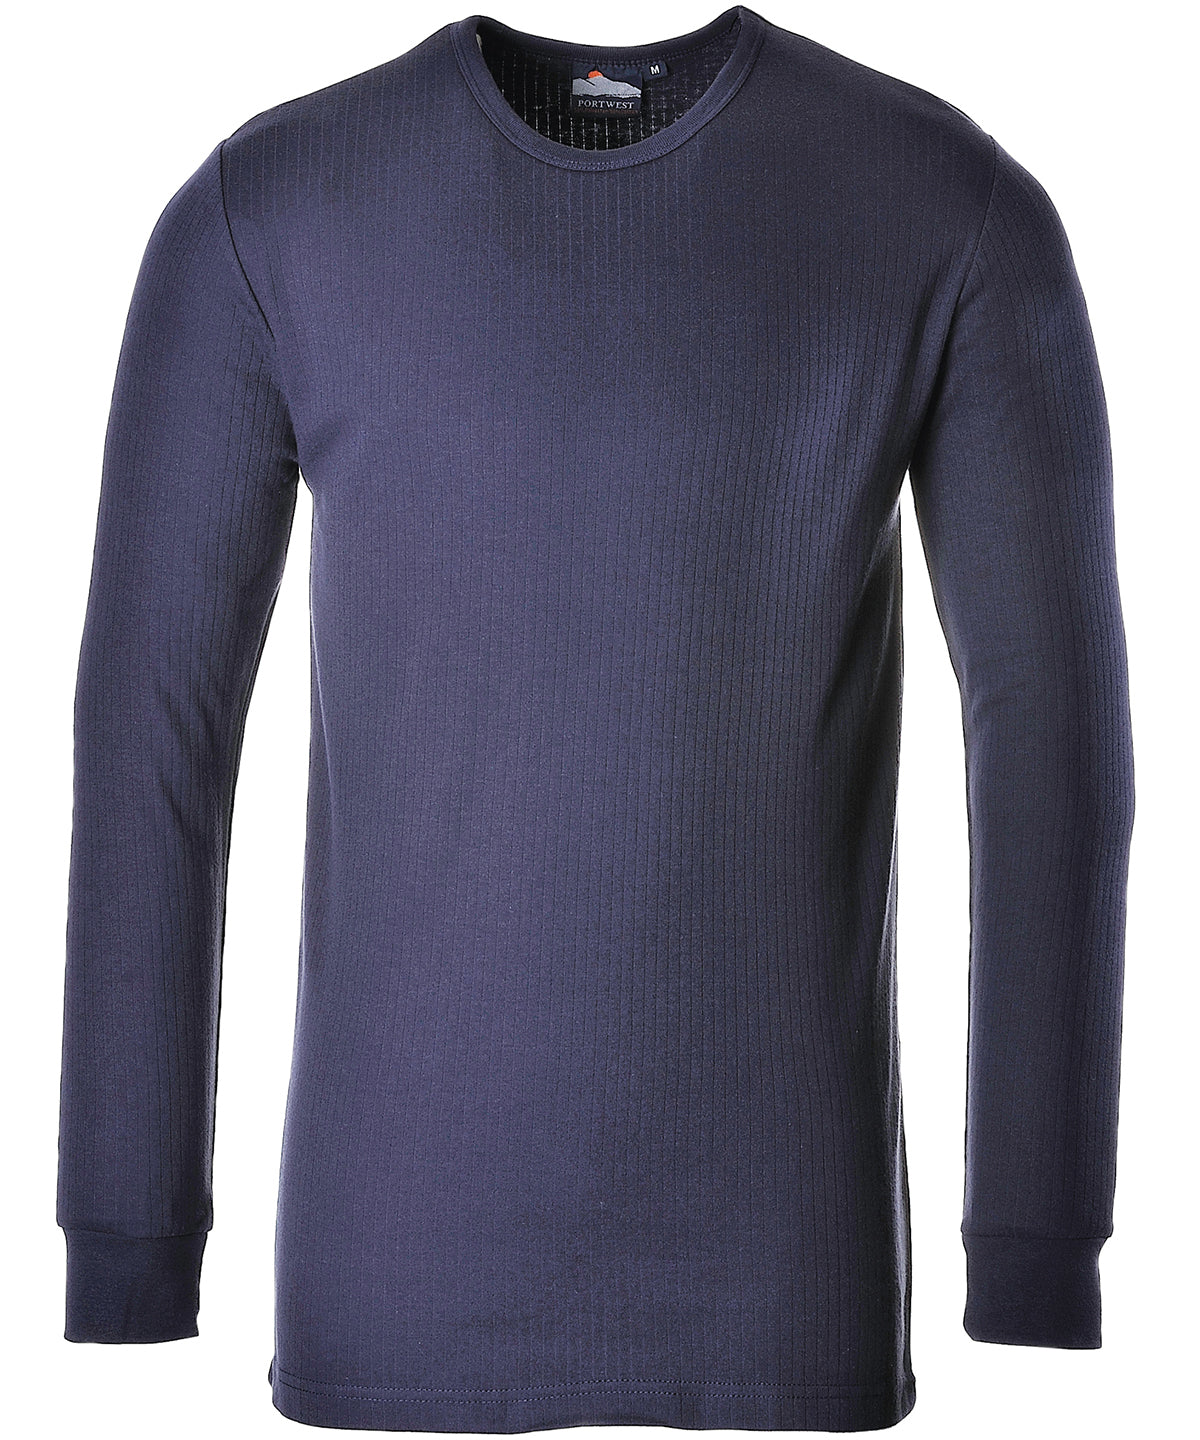 Portwest Thermal t-shirt long sleeved